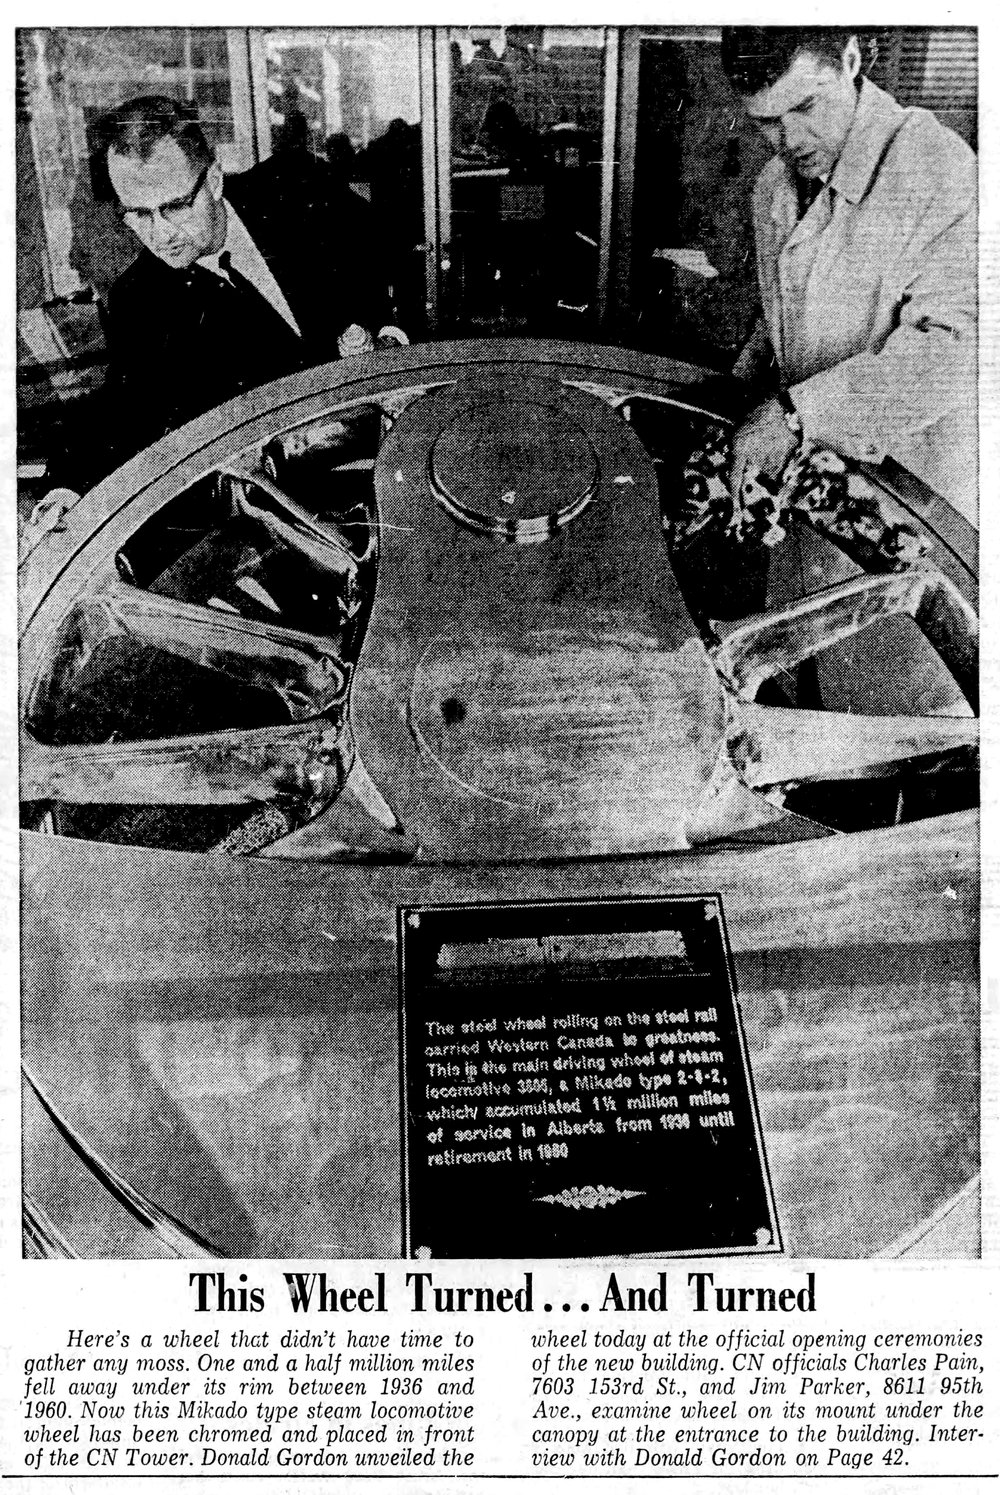  The large Mikado wheel presented to the City of Edmonton by Canadian National.   Edmonton Journal , November 4th, 1966. 